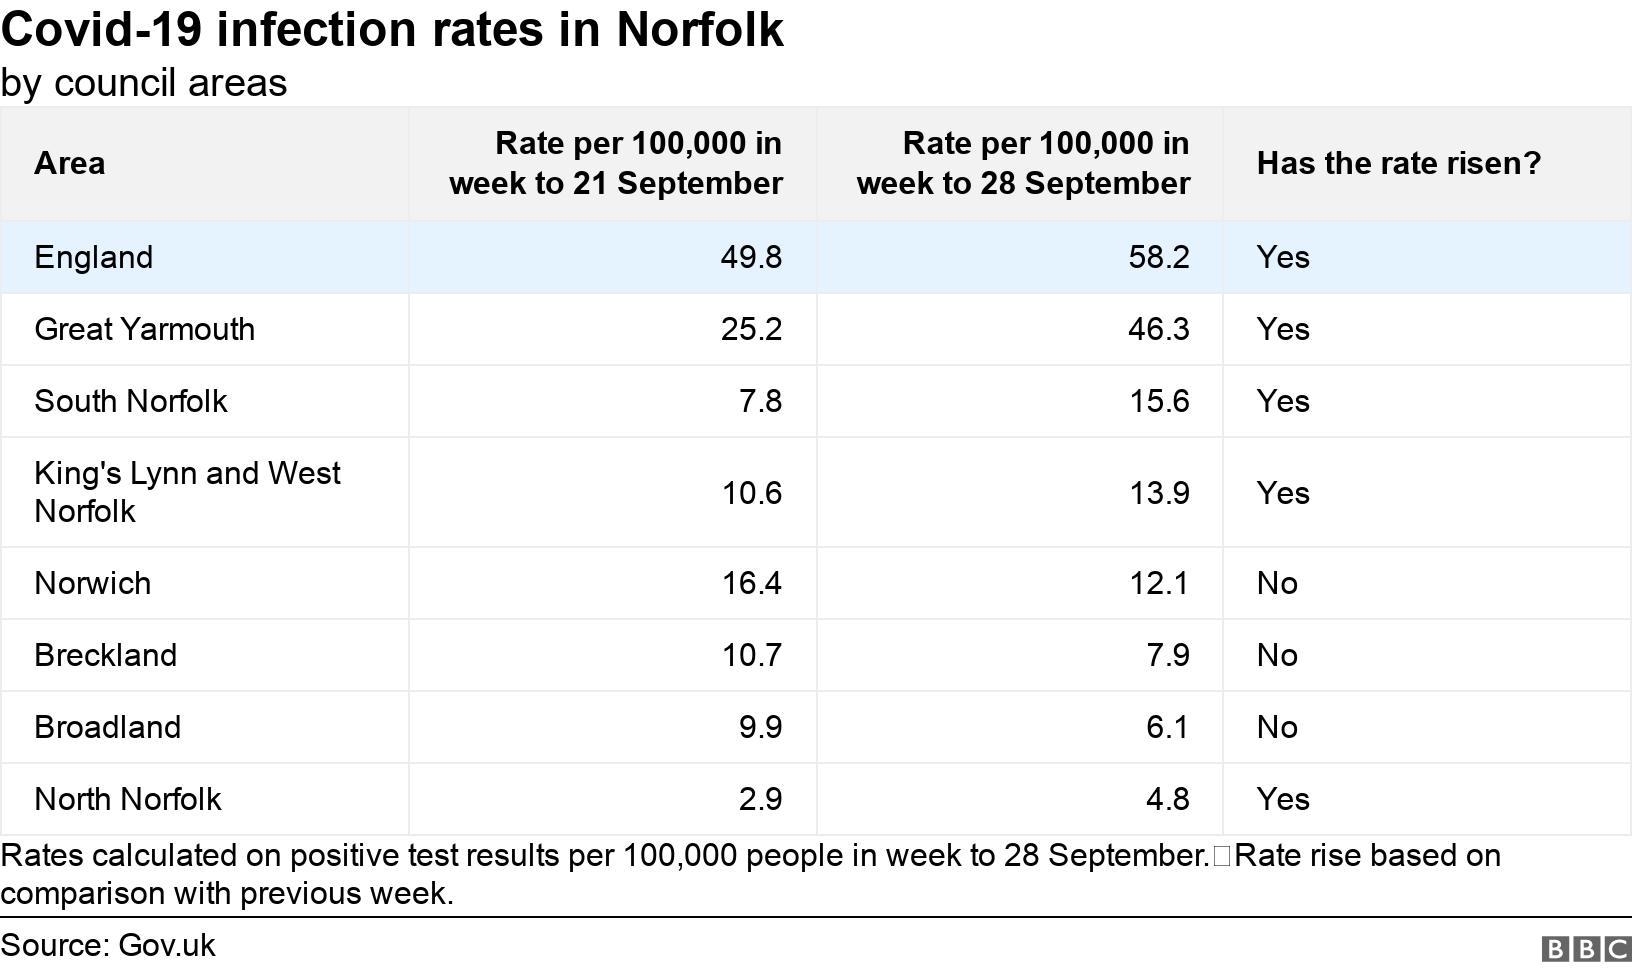 Covid-19 infection rates in Norfolk. by council areas. Rates calculated on positive test results per 100,000 people in week to 28 September.Rate rise based on comparison with previous week..